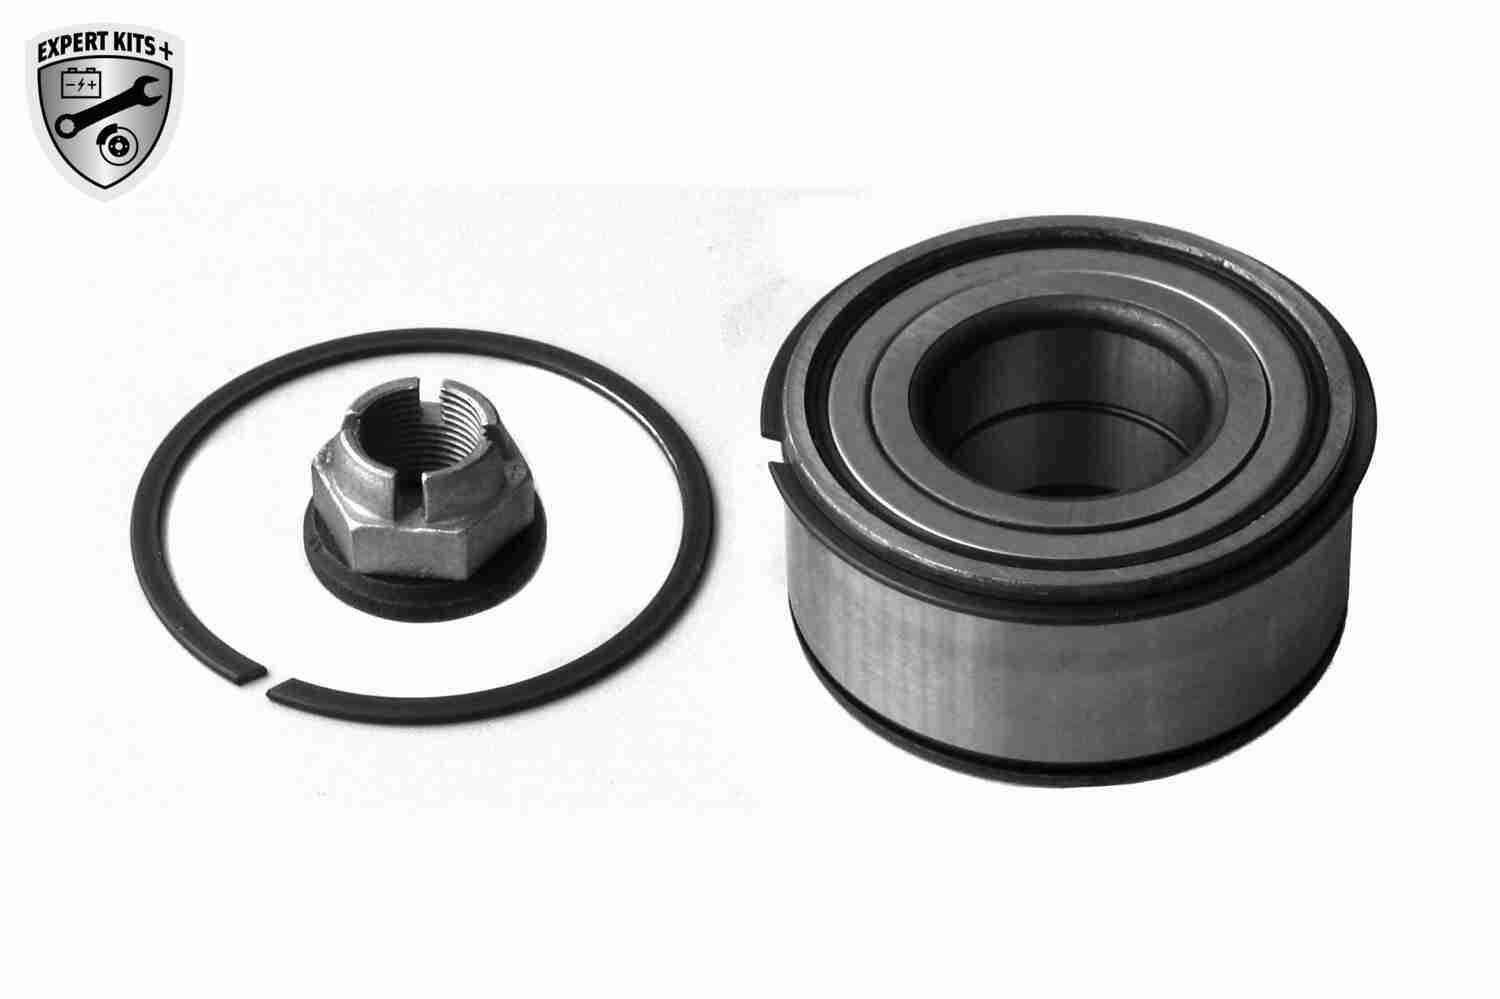 VAICO V46-0443 Wheel bearing kit Front Axle, EXPERT KITS +, with integrated magnetic sensor ring, 84,1 mm